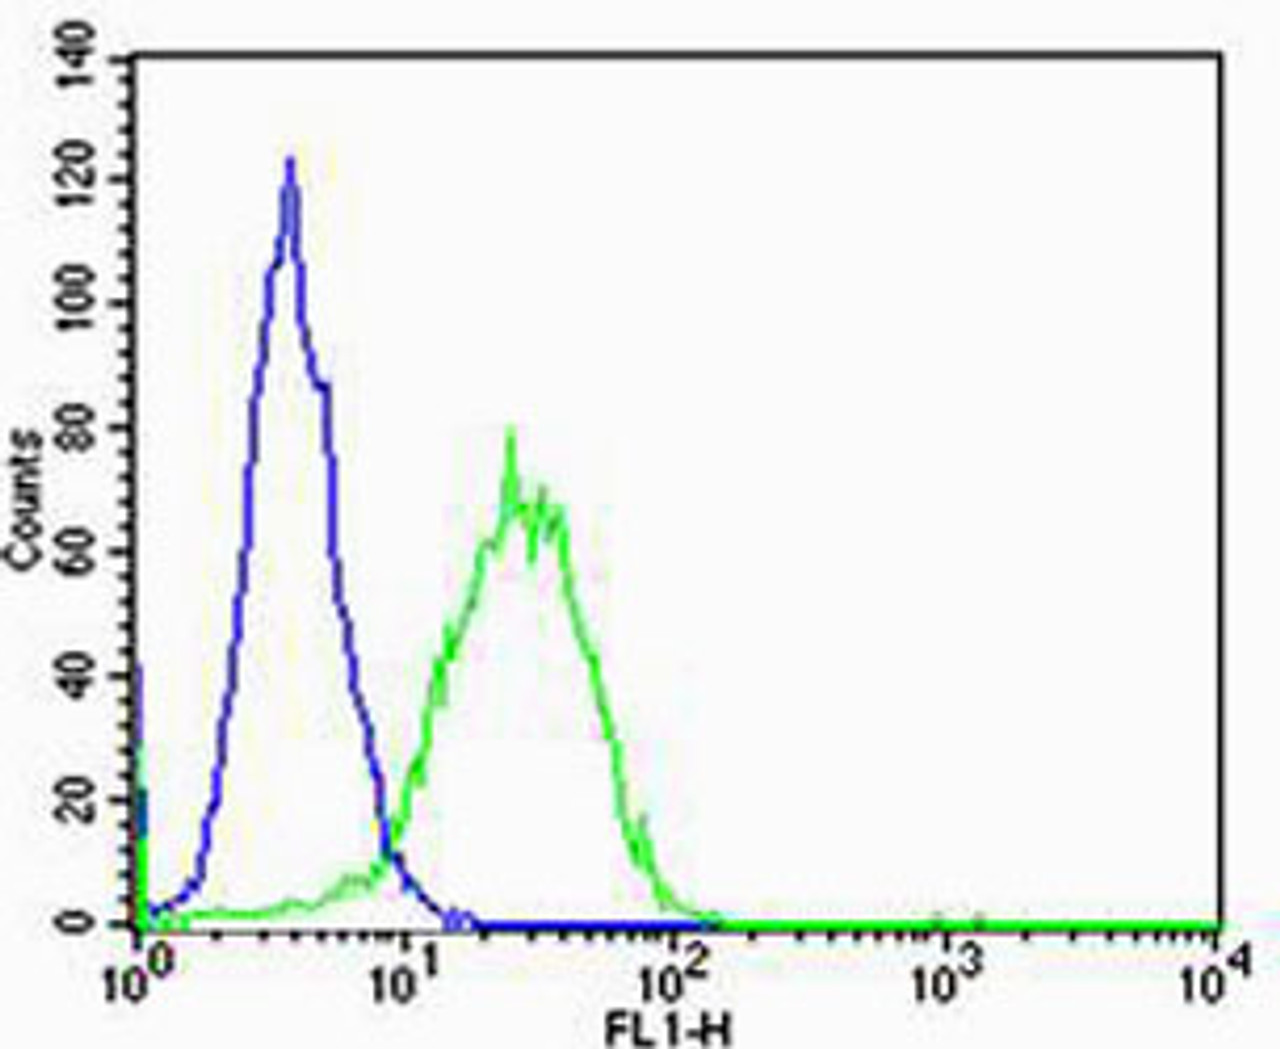 Flow cytometric analysis of Hela cells using EEF1B2 Antibody (green) compared to an isotype control of rabbit IgG (blue) . Antibody was diluted at 1:25 dilution. An Alexa Fluor 488 goat anti-rabbit lgG at 1:400 dilution was used as the secondary antibody.